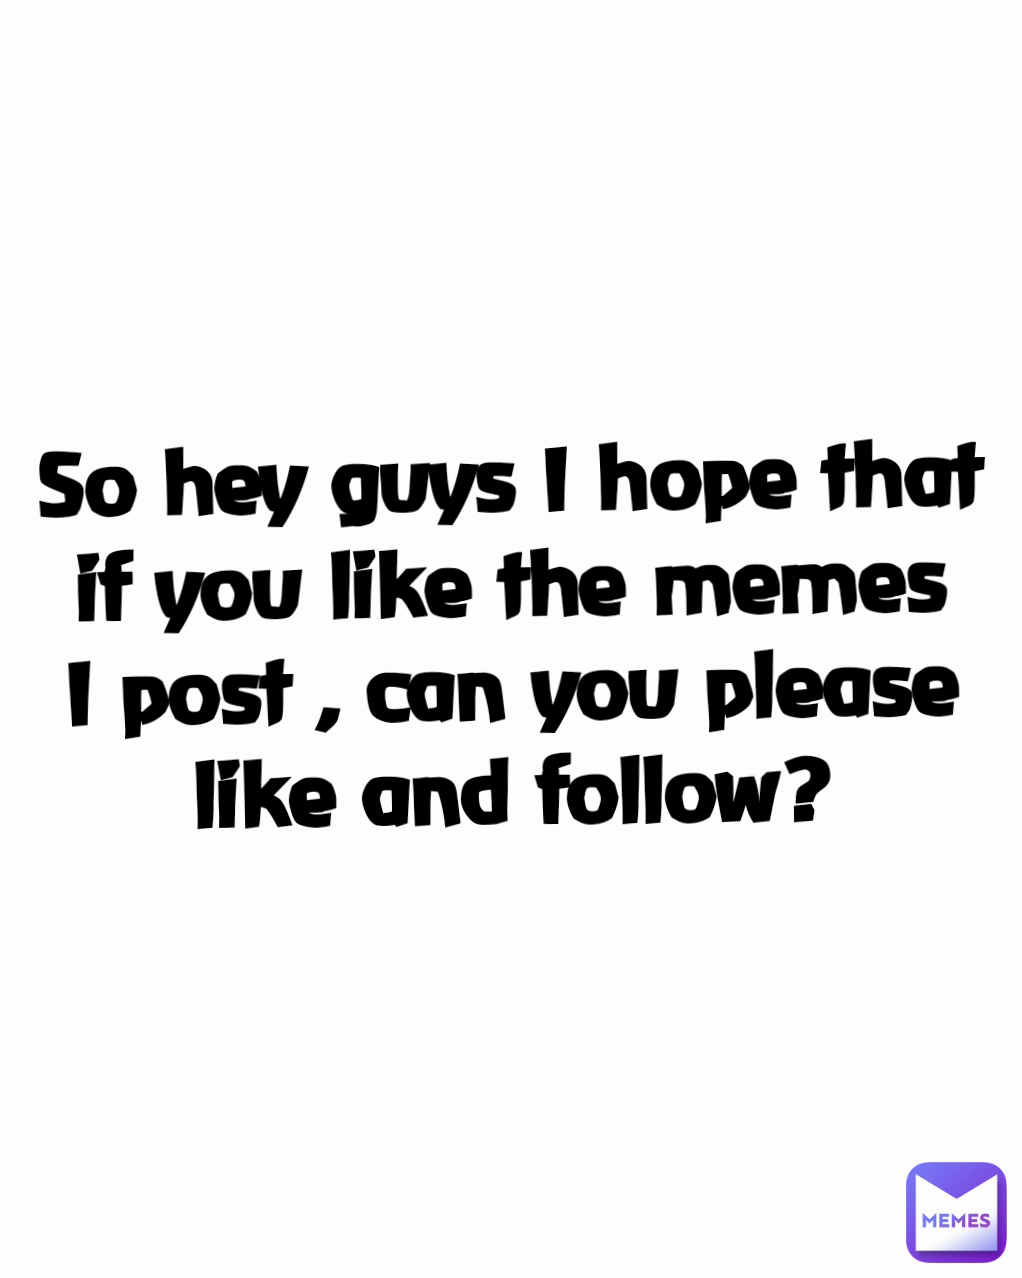 So hey guys I hope that if you like the memes I post , can you please like and follow?